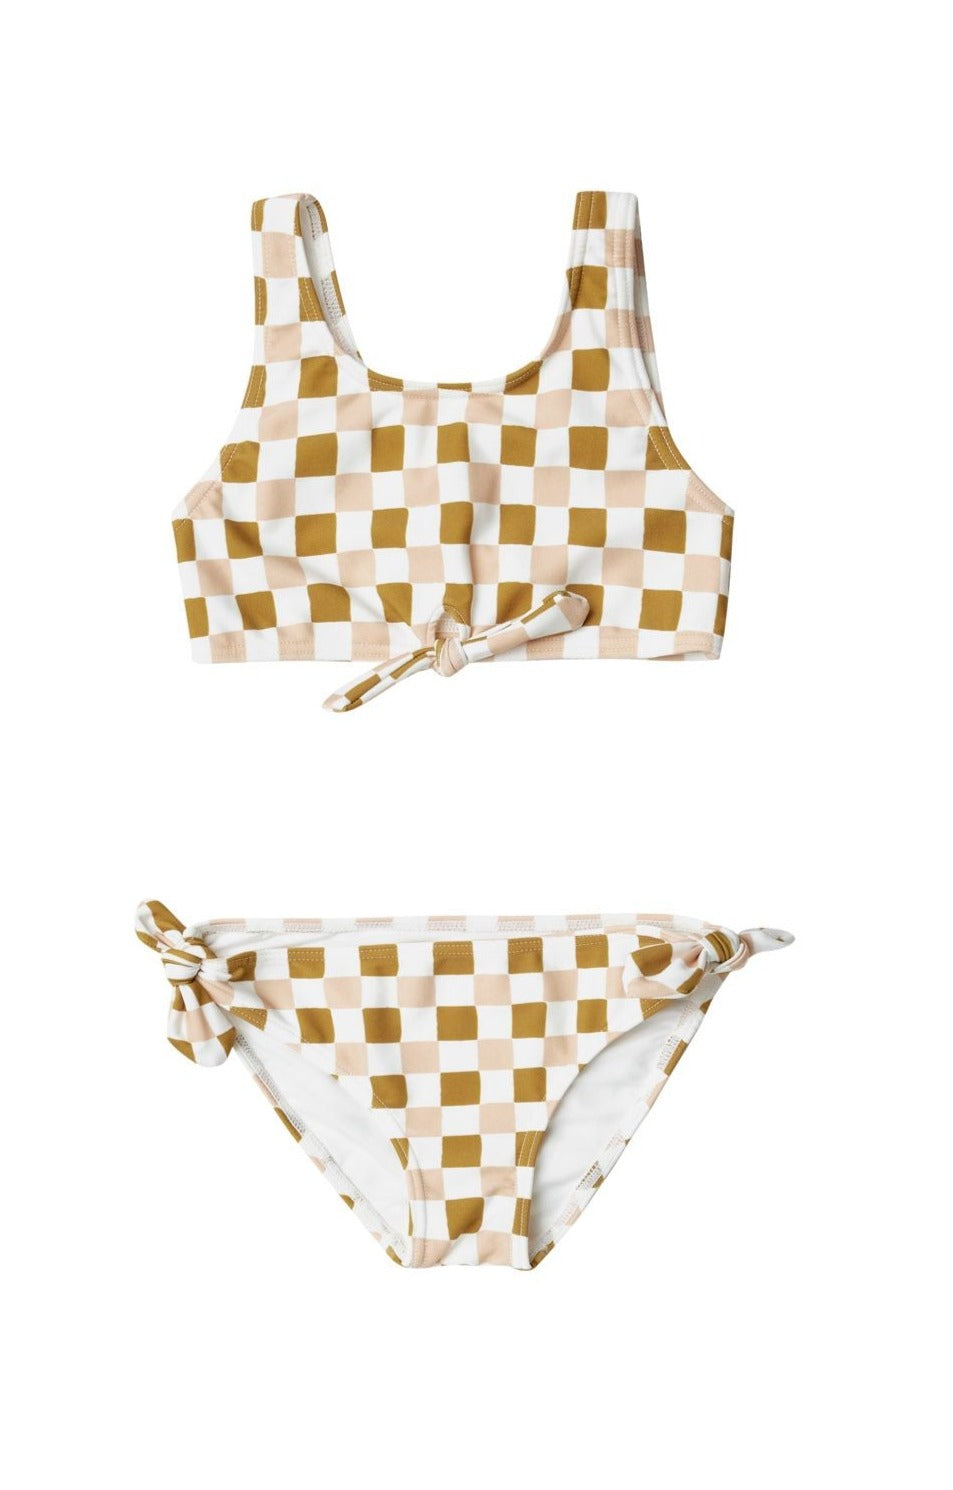 The Knotted Bikini Swimsuit by Rylee and Cru - BABY